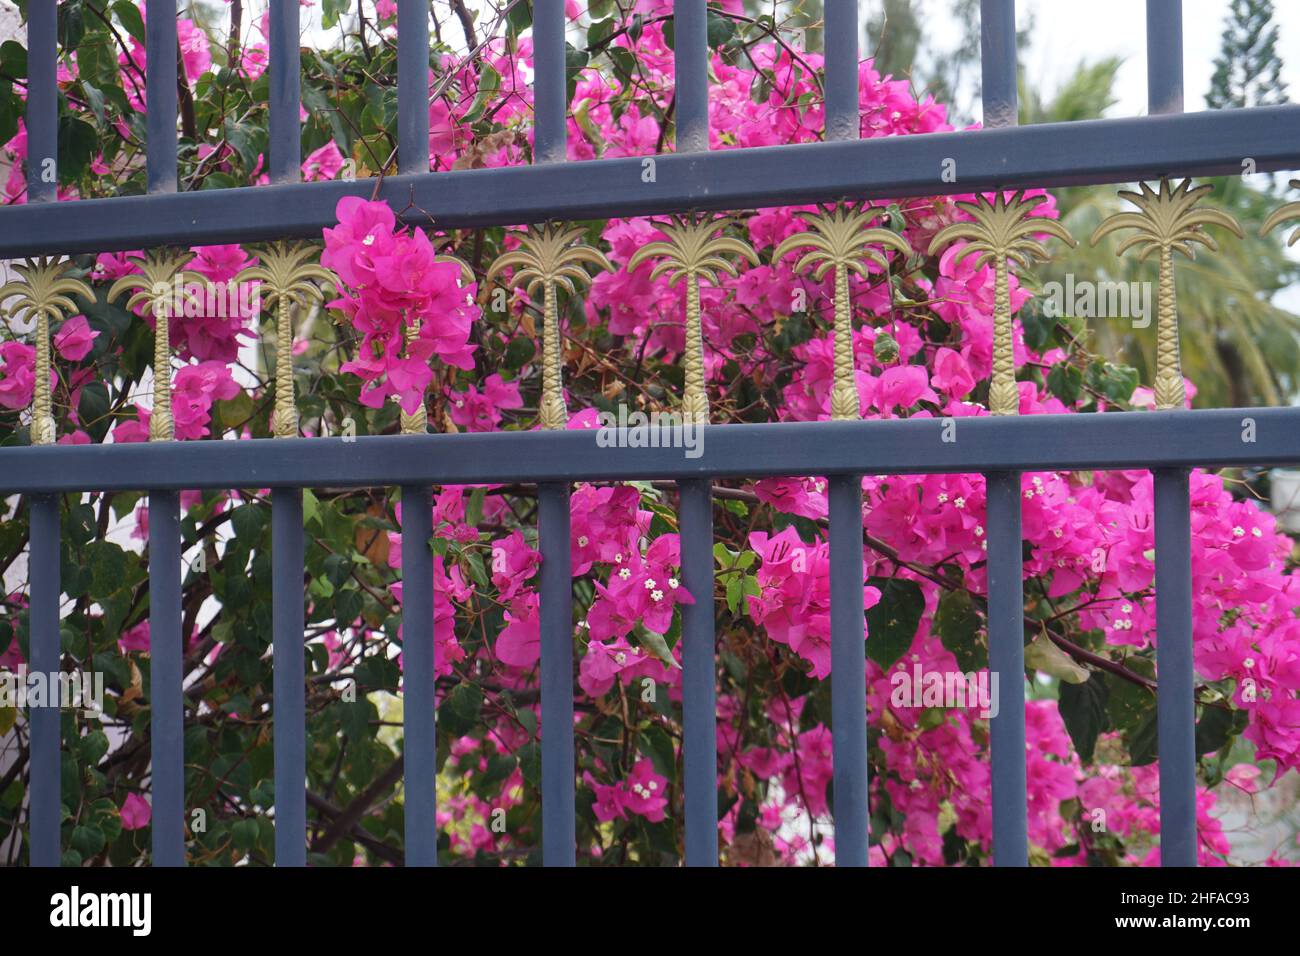 black metal gate entrance with gold palm trees carvings  and a pink bougainvillea in bloom  on the tropical island of La Réunion, France Stock Photo